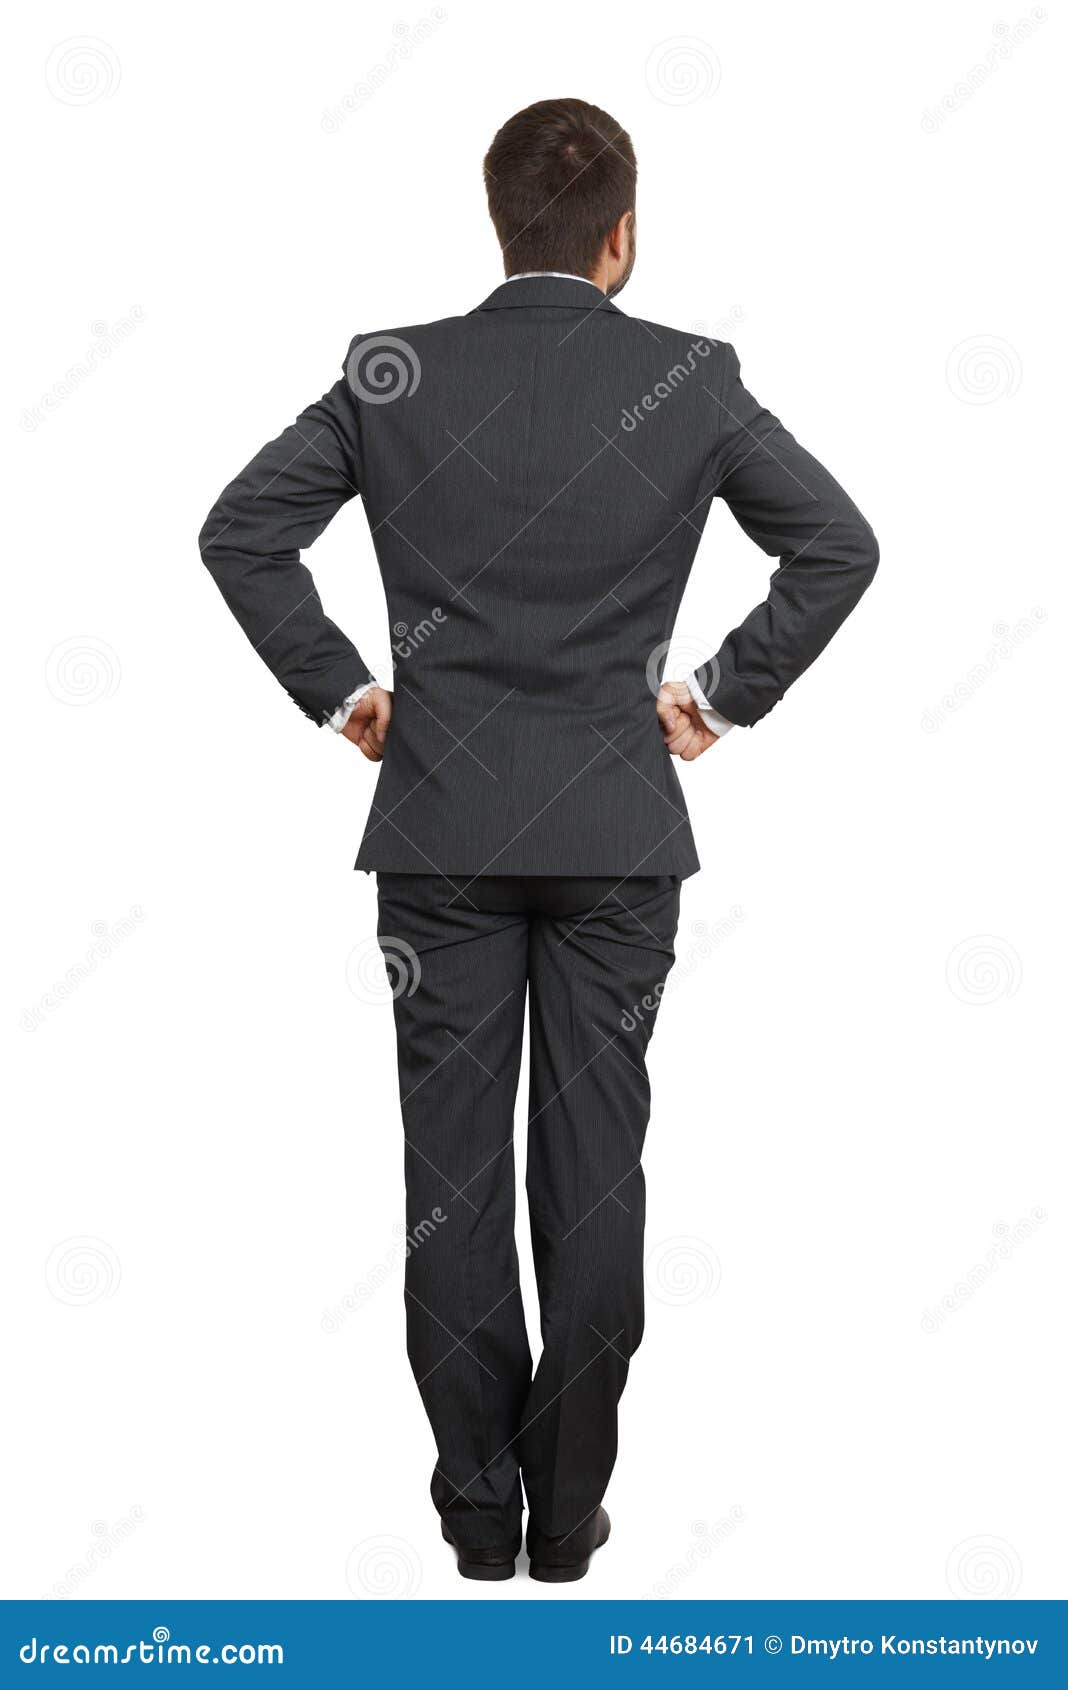 Man in Suit with Hands on Belt Stock Image - Image of adult, isolated ...